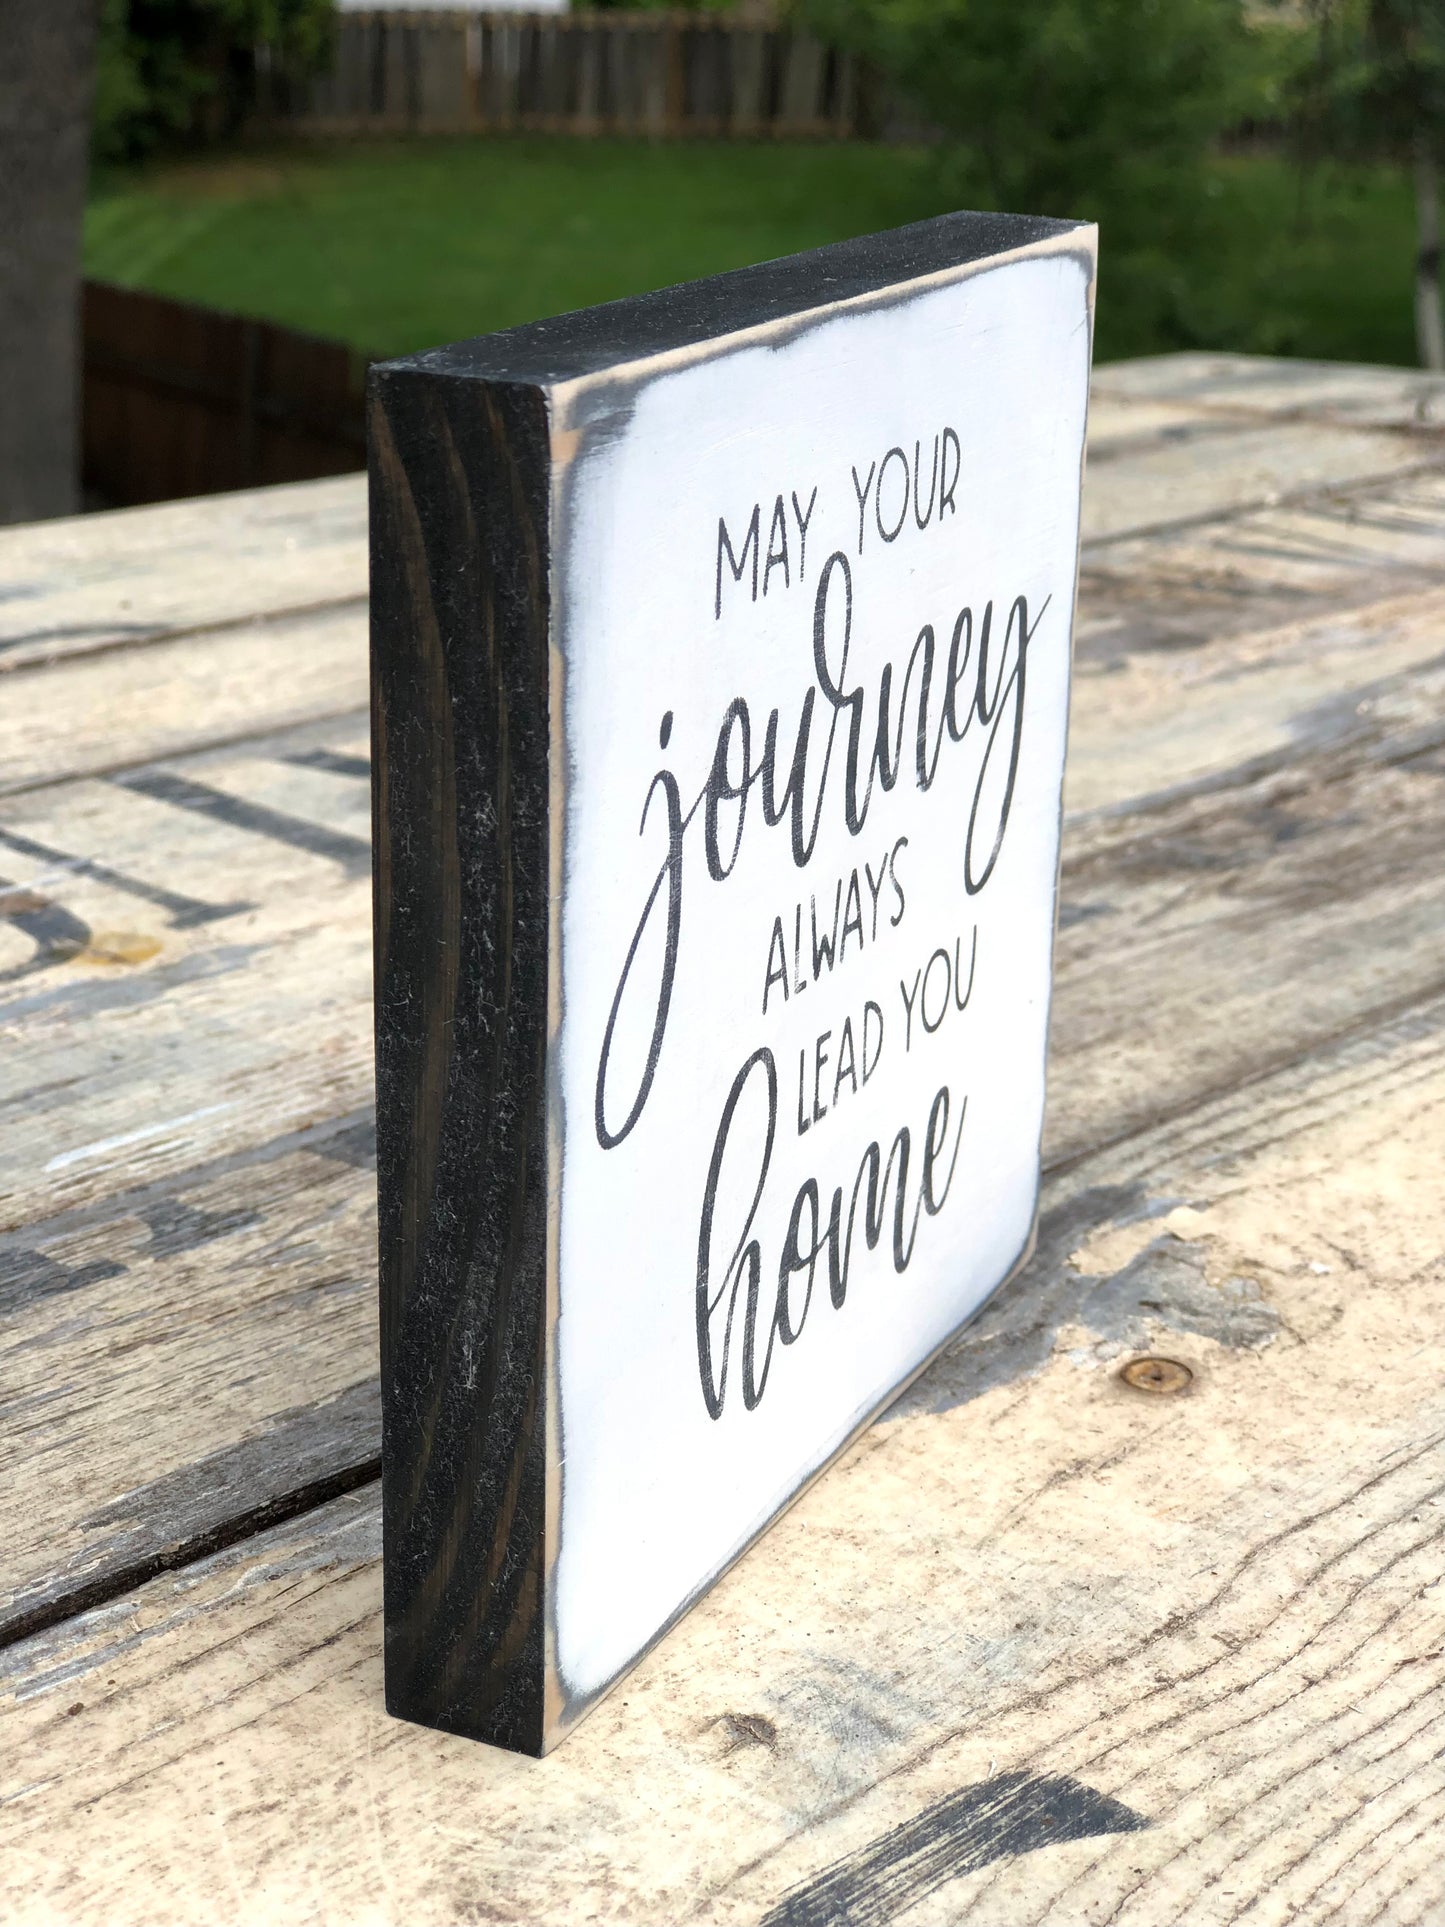 MAY YOUR JOURNEY ALWAYS LEAD YOU HOME - WOOD SIGN